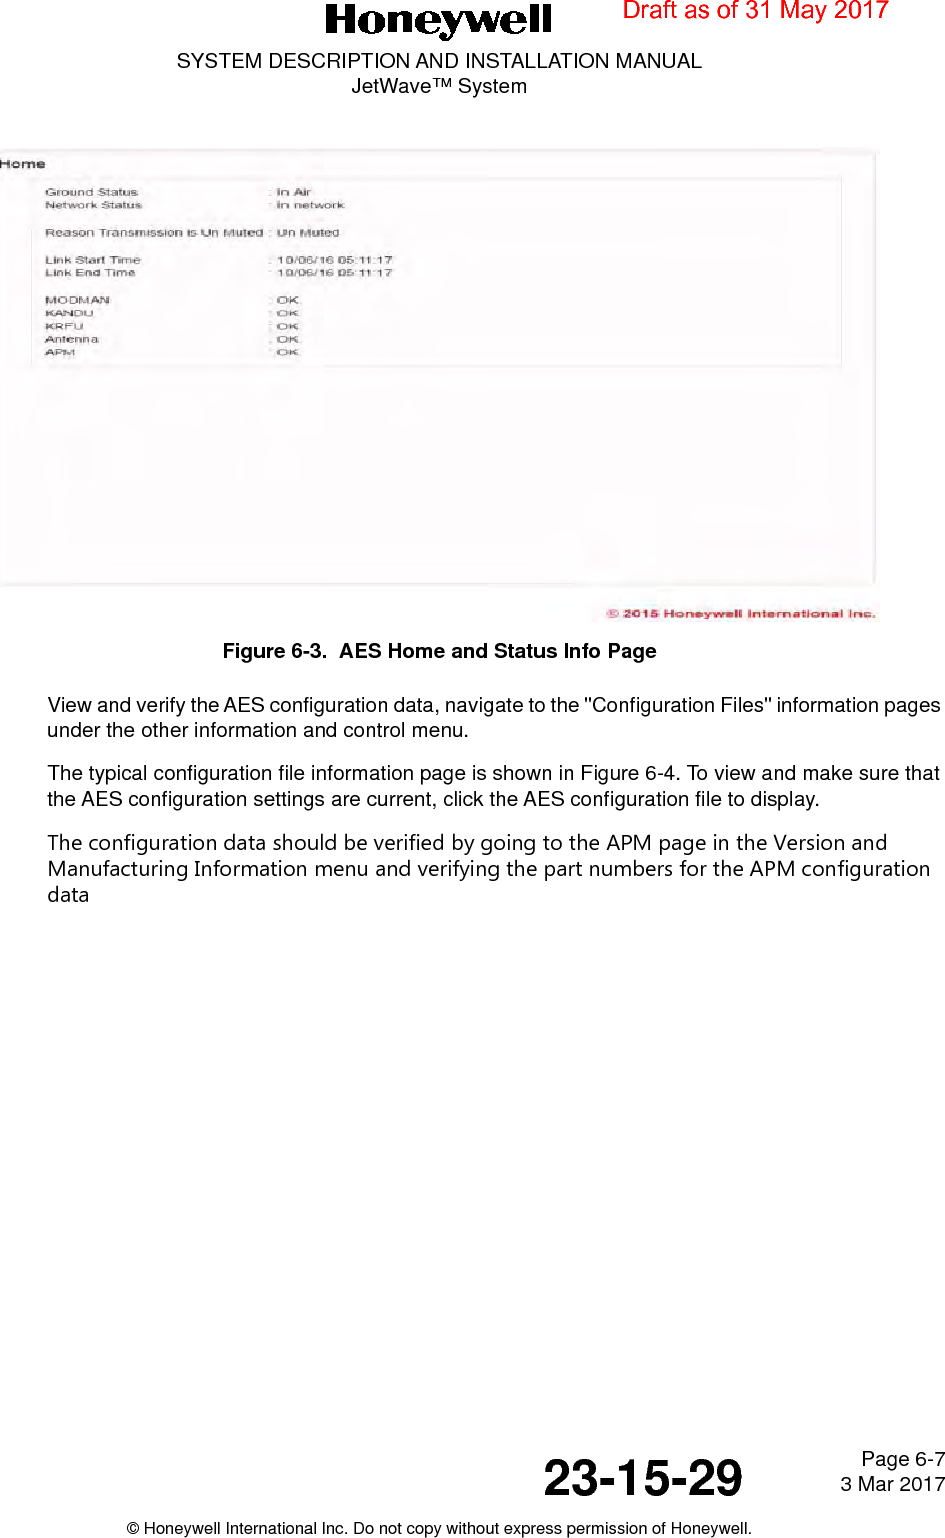 Page 6-7 3 Mar 201723-15-29SYSTEM DESCRIPTION AND INSTALLATION MANUALJetWave™ System© Honeywell International Inc. Do not copy without express permission of Honeywell.Figure 6-3.  AES Home and Status Info PageView and verify the AES configuration data, navigate to the &quot;Configuration Files&quot; information pages under the other information and control menu. The typical configuration file information page is shown in Figure 6-4. To view and make sure that the AES configuration settings are current, click the AES configuration file to display.The configuration data should be verified by going to the APM page in the Version and Manufacturing Information menu and verifying the part numbers for the APM configuration dataDraft as of 31 May 2017